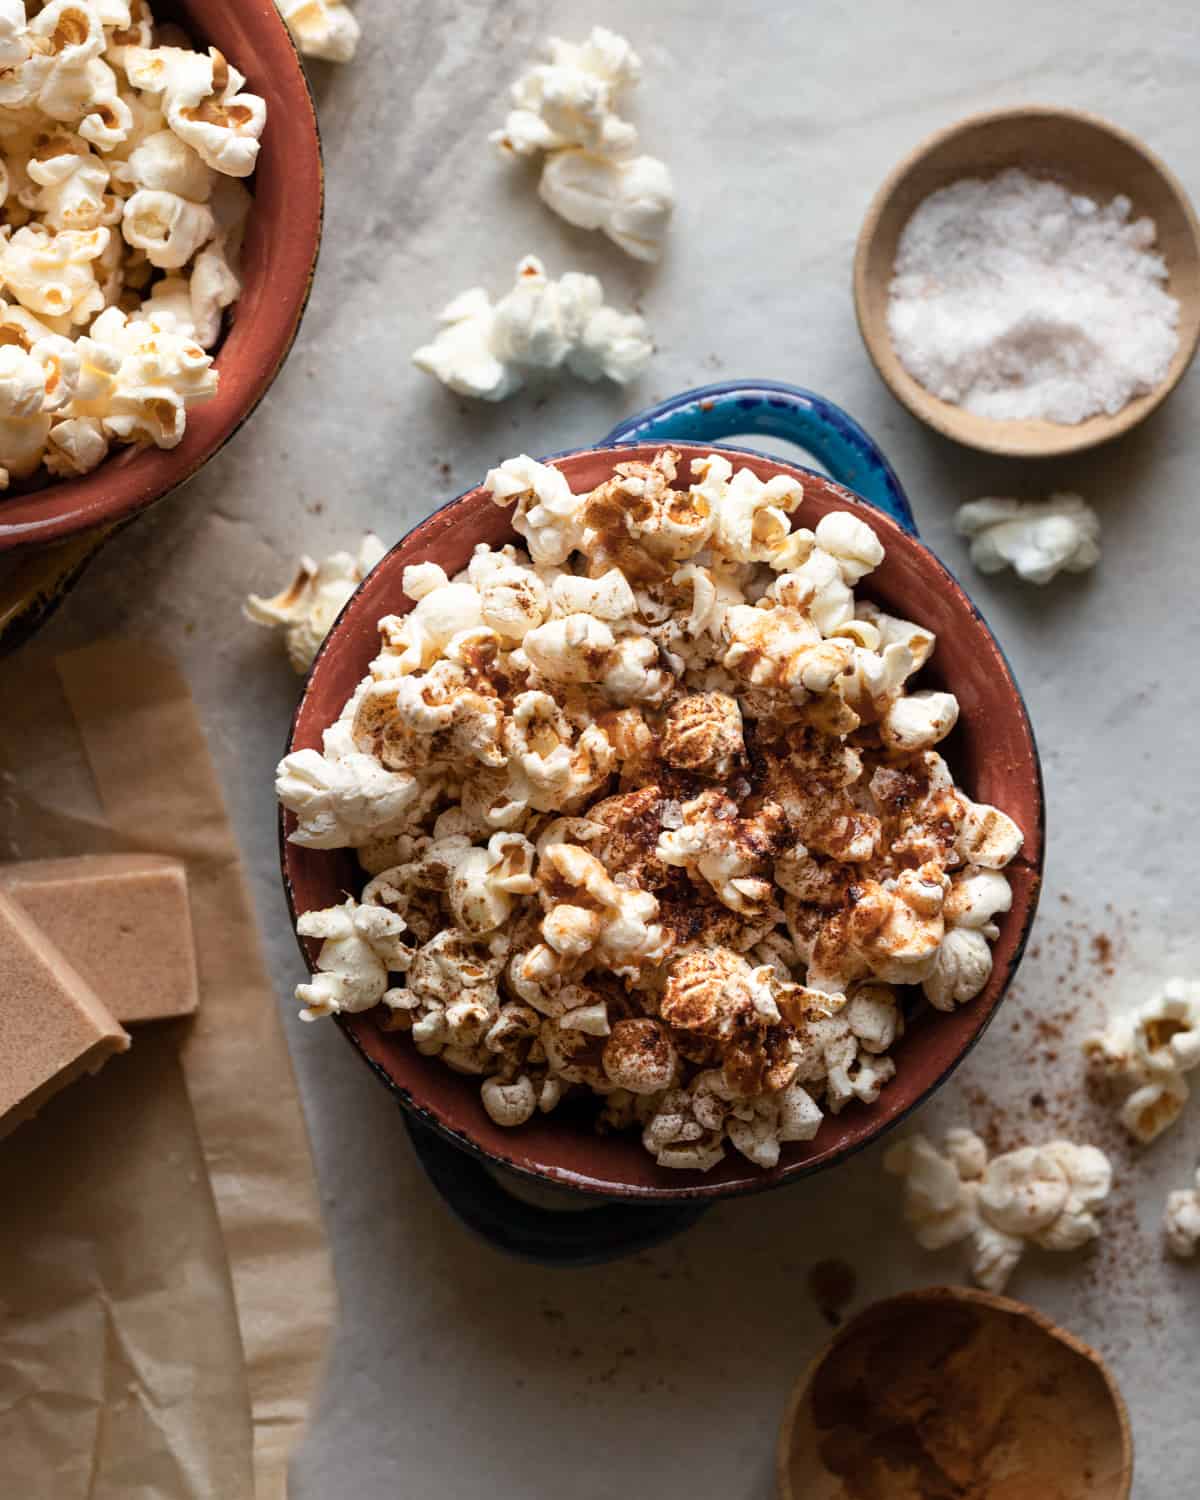 Image of a bowl of popped cinnamon vegan popcorn. The bowl is surrounded by some vegan butter, and small bowls of ground cinnamon and sea salt.